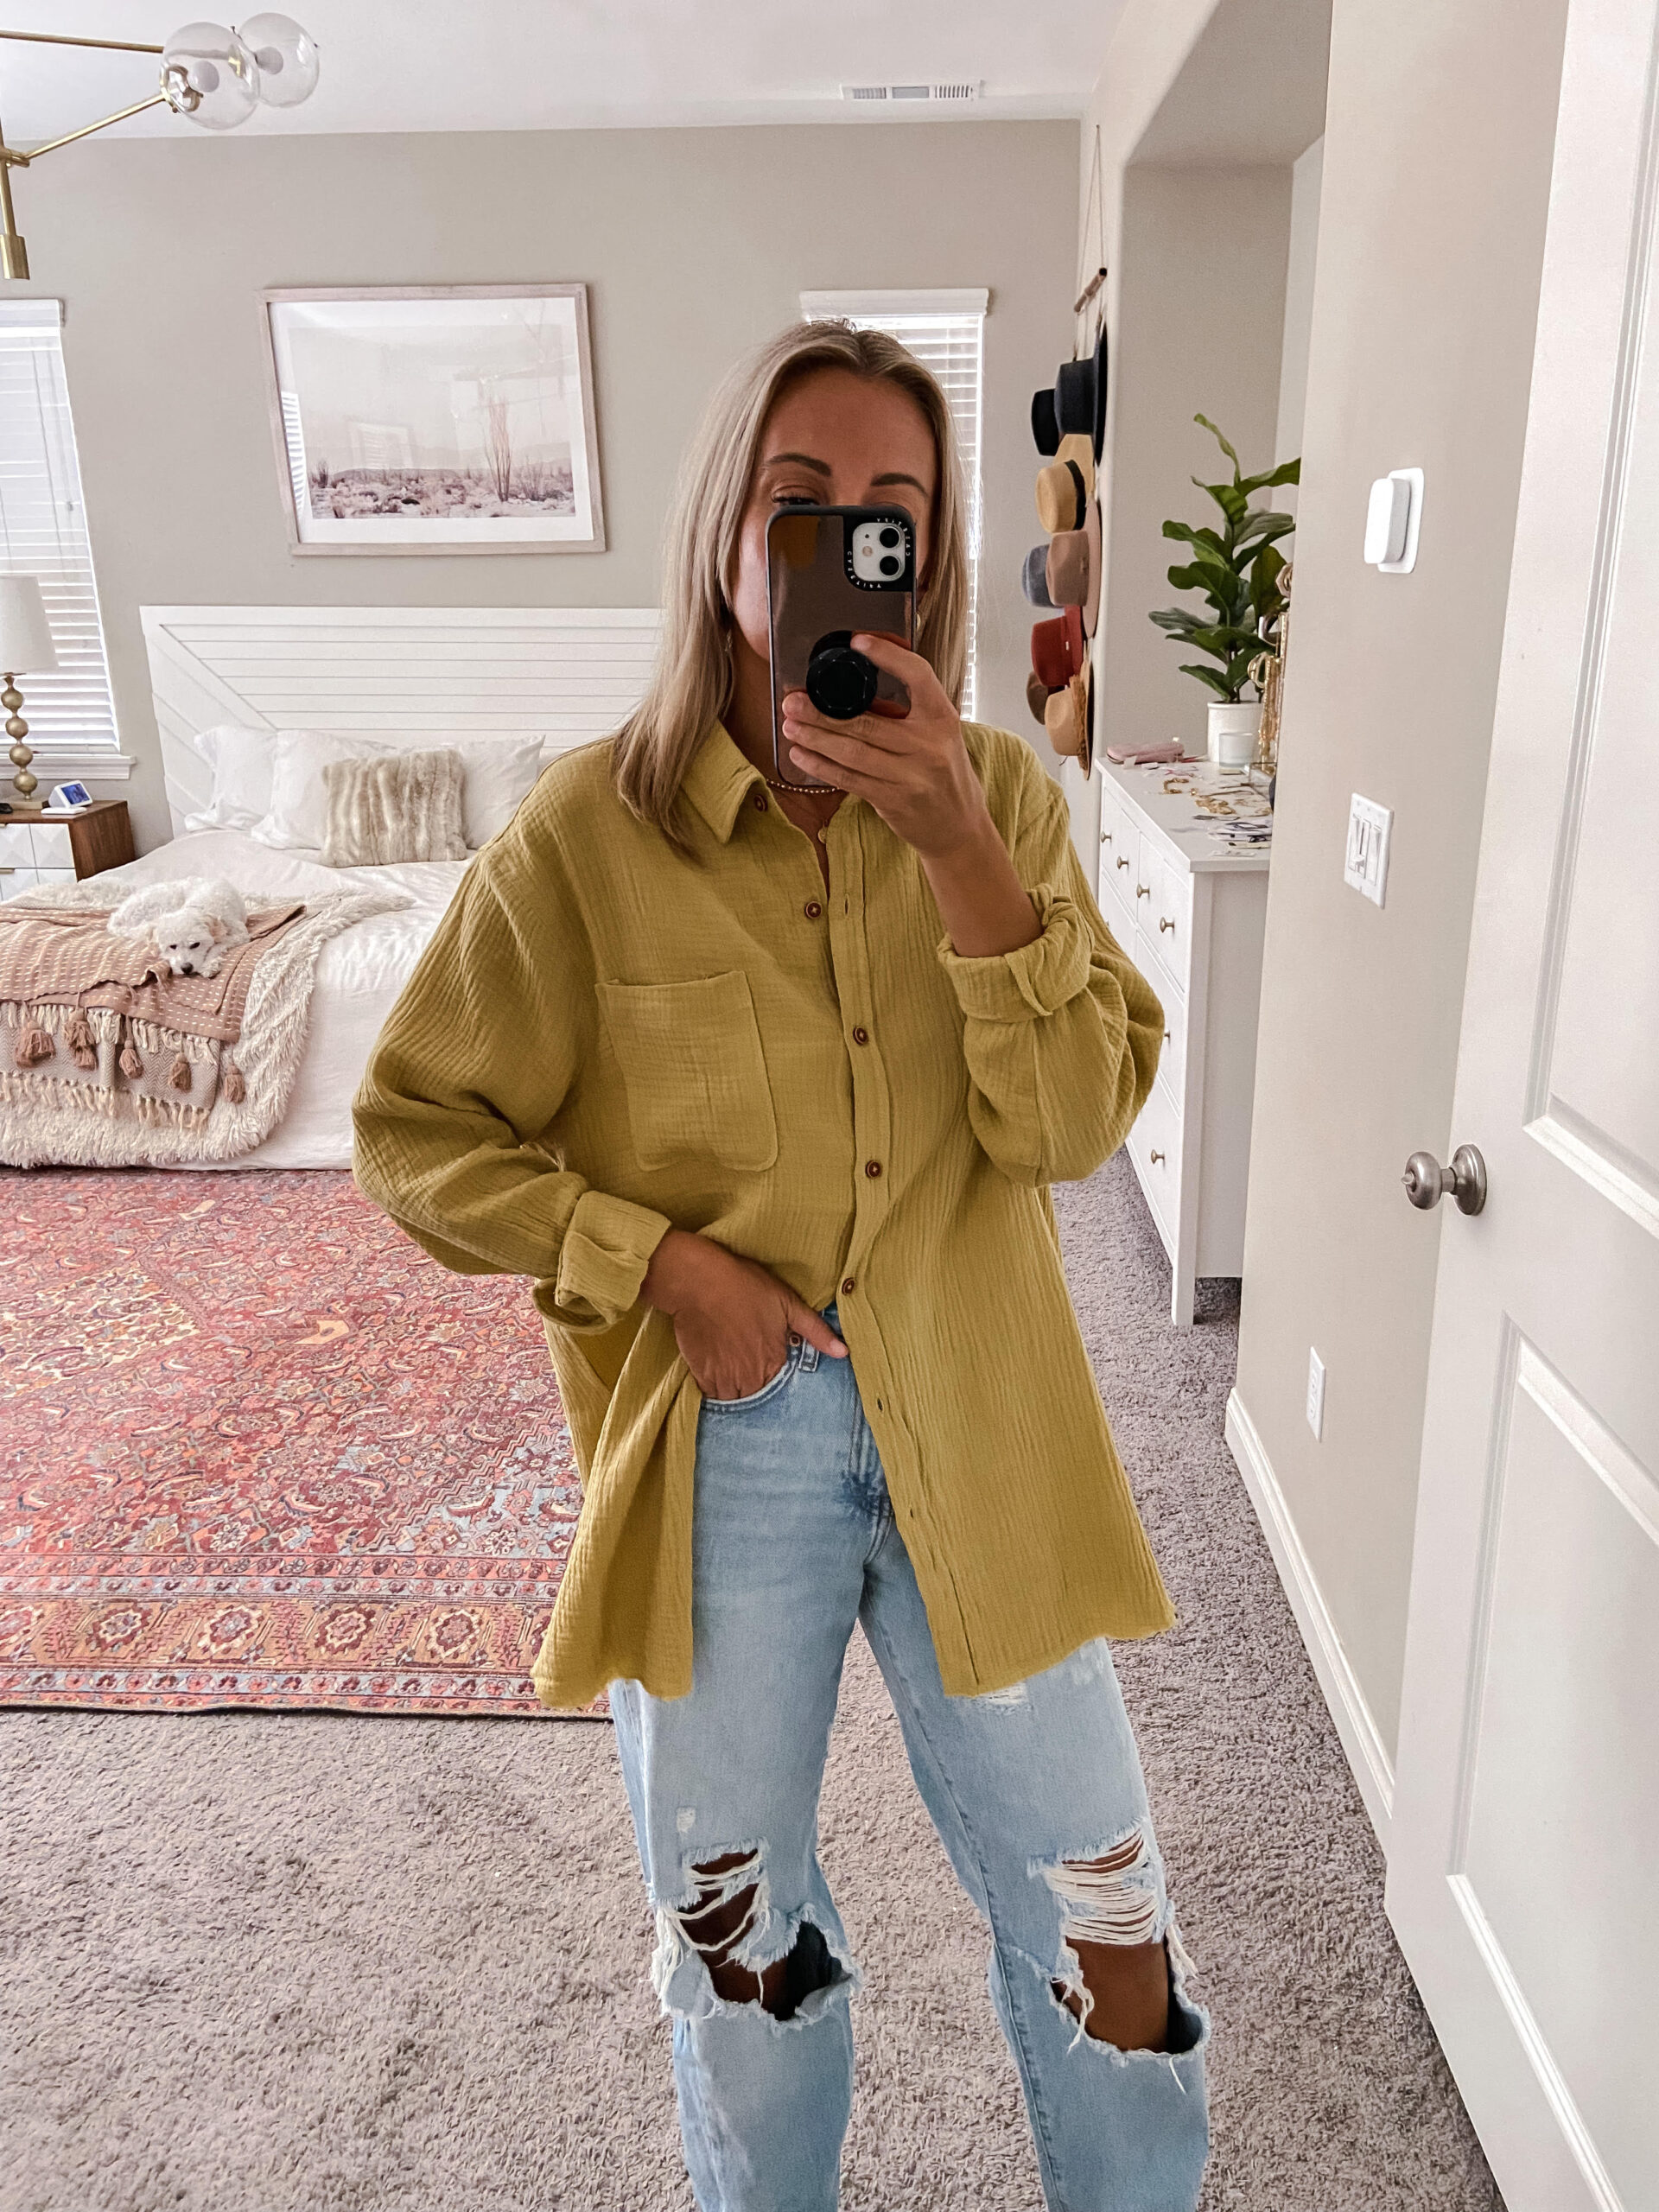 MY LATEST FOREVER21 FINDS-JACLYN DE LEON STYLE. FOREVER21 outfits. Everything from a casual chic buttondown, boho dress, 90's inspired jeans, chic blazer, and preppy school girl outfit.